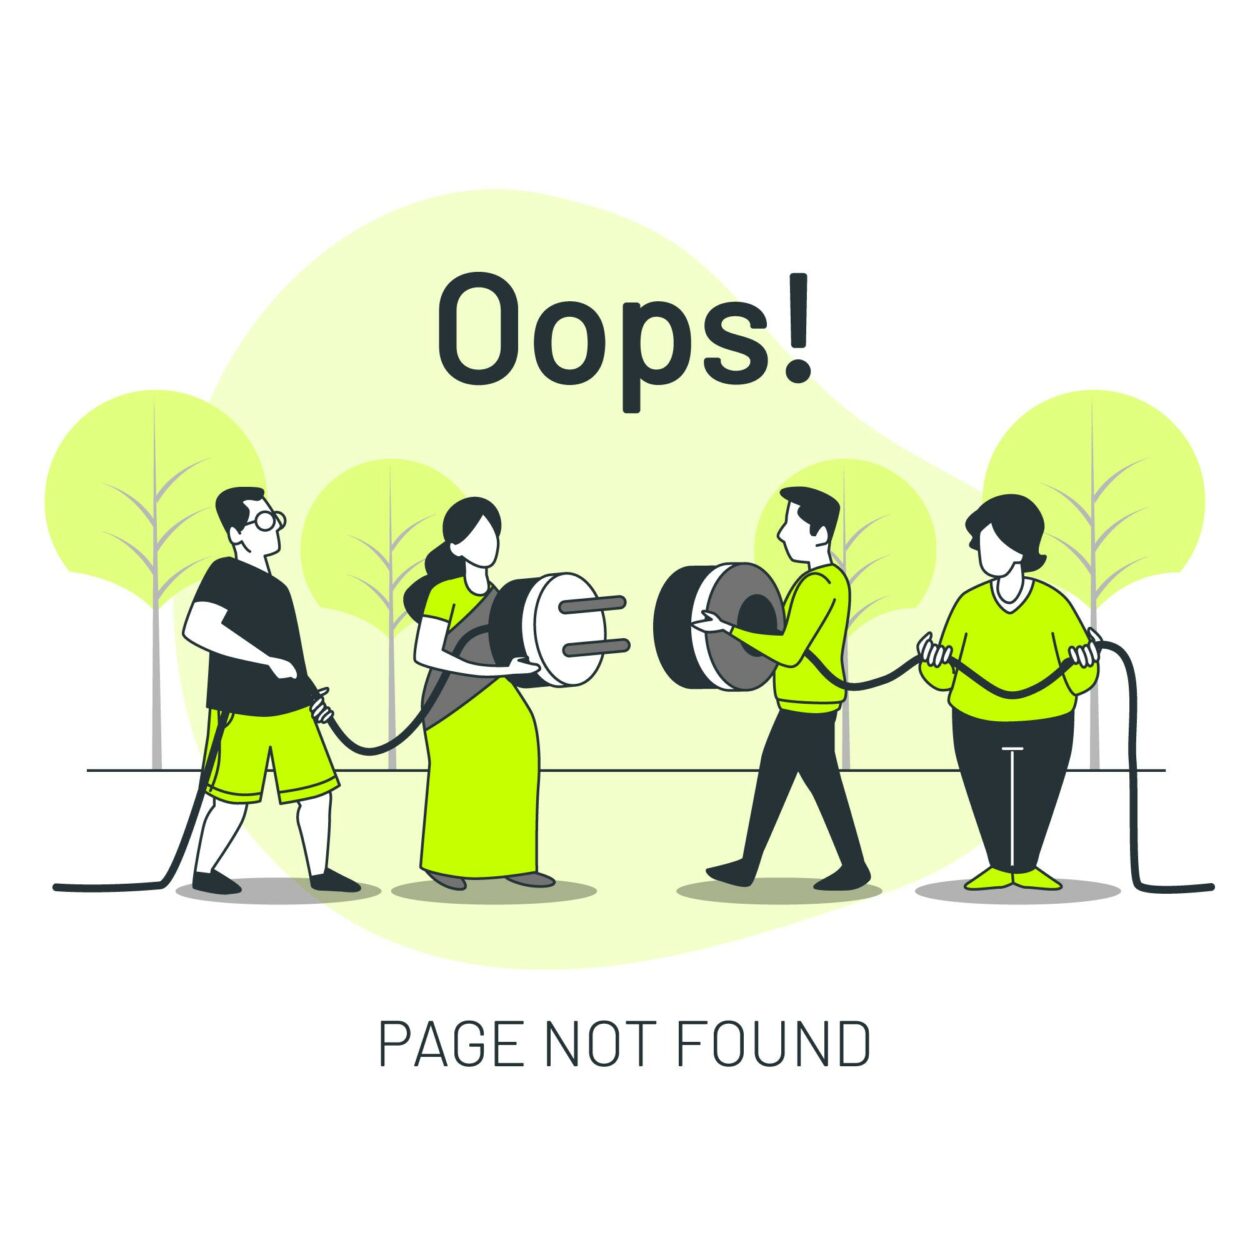 page not found image